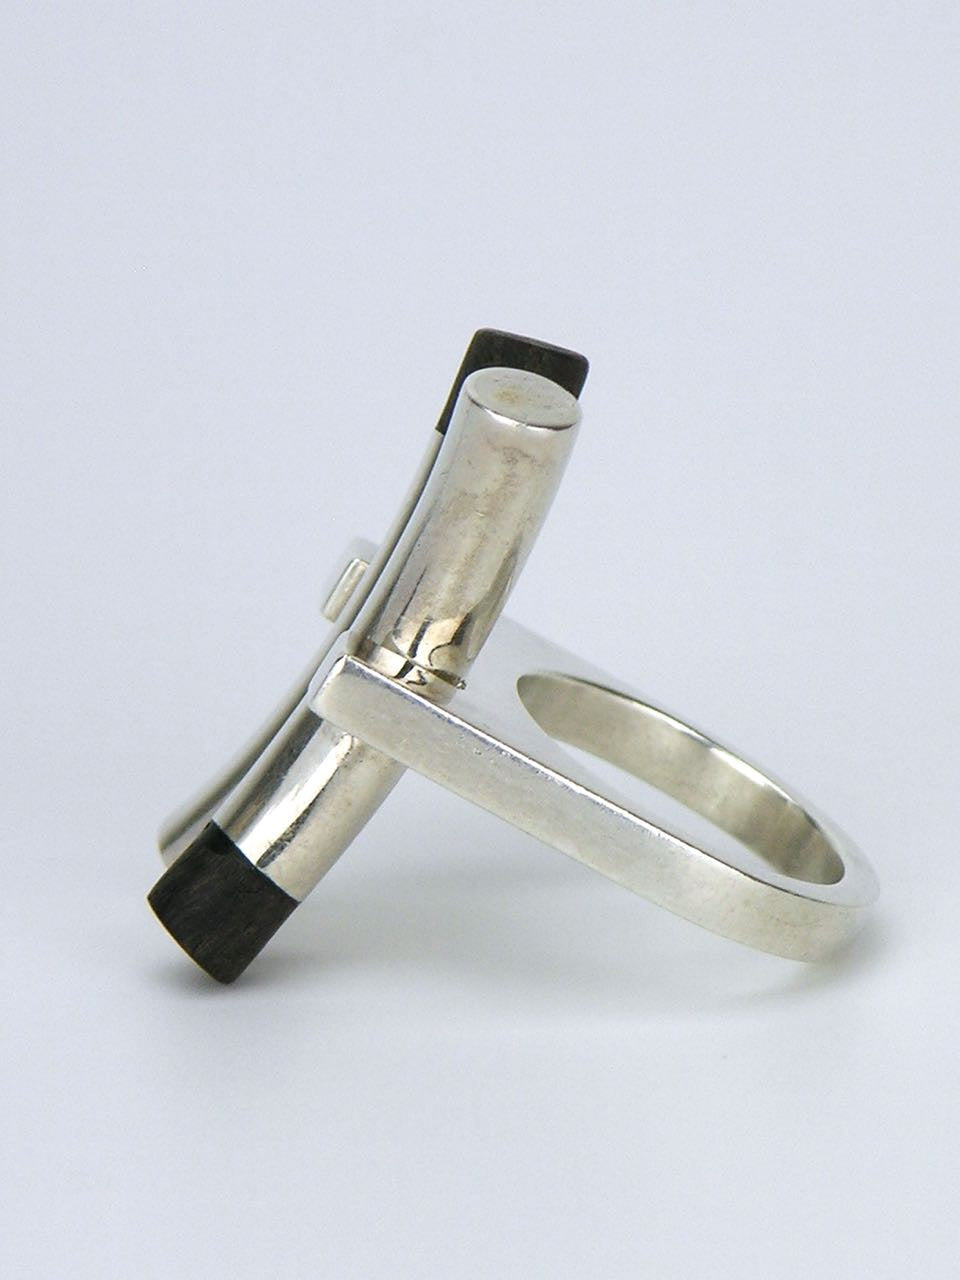 Solid silver and ebony "X" ring